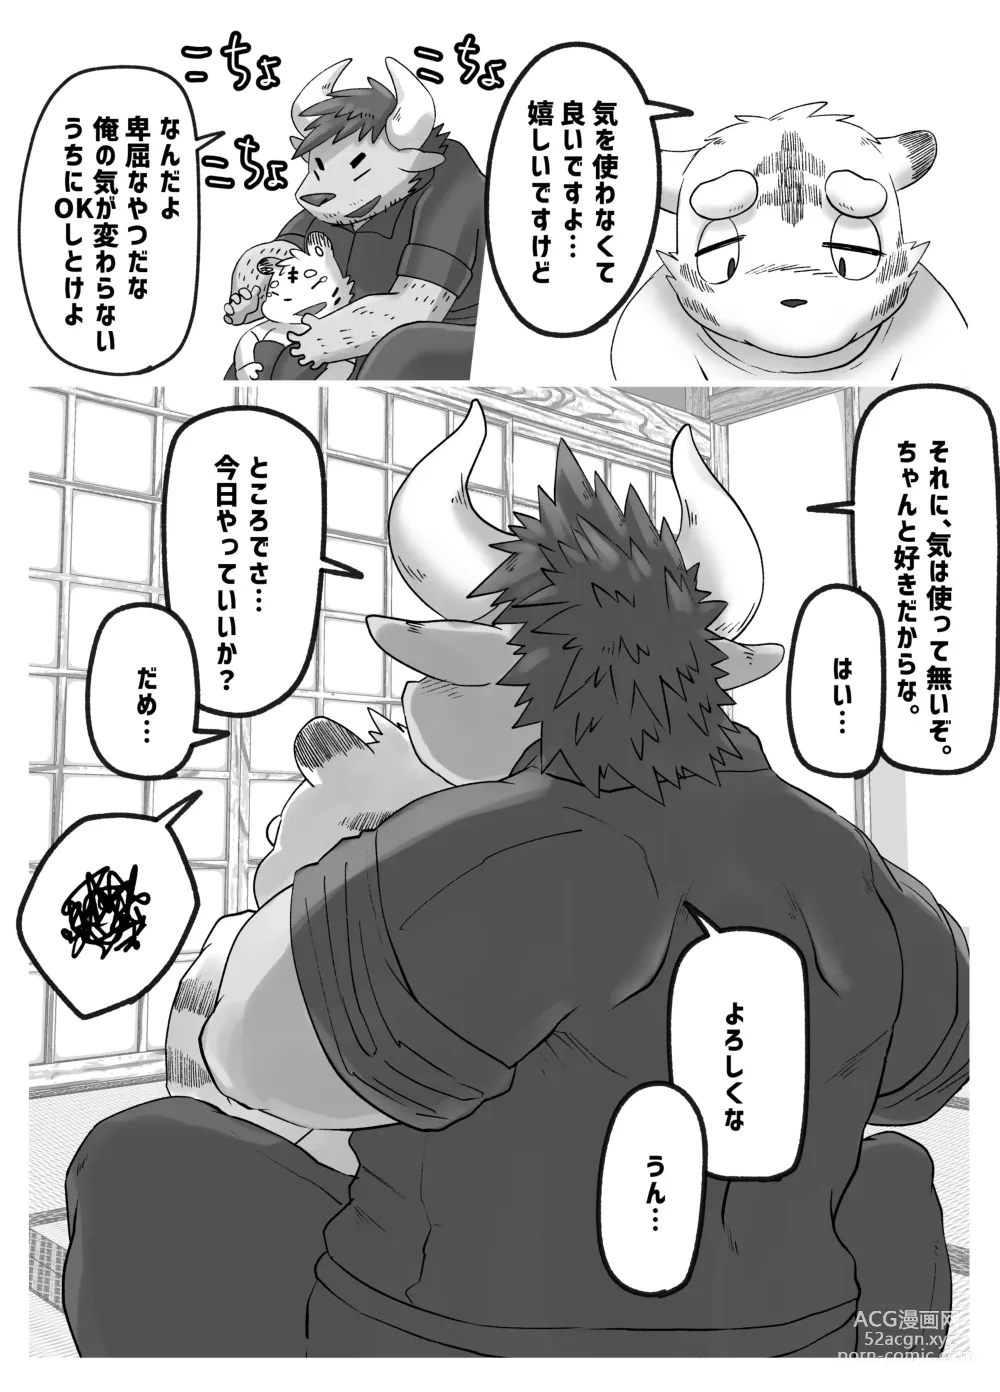 Page 17 of doujinshi Muscular Bull Teacher & Chubby Tiger Student 3